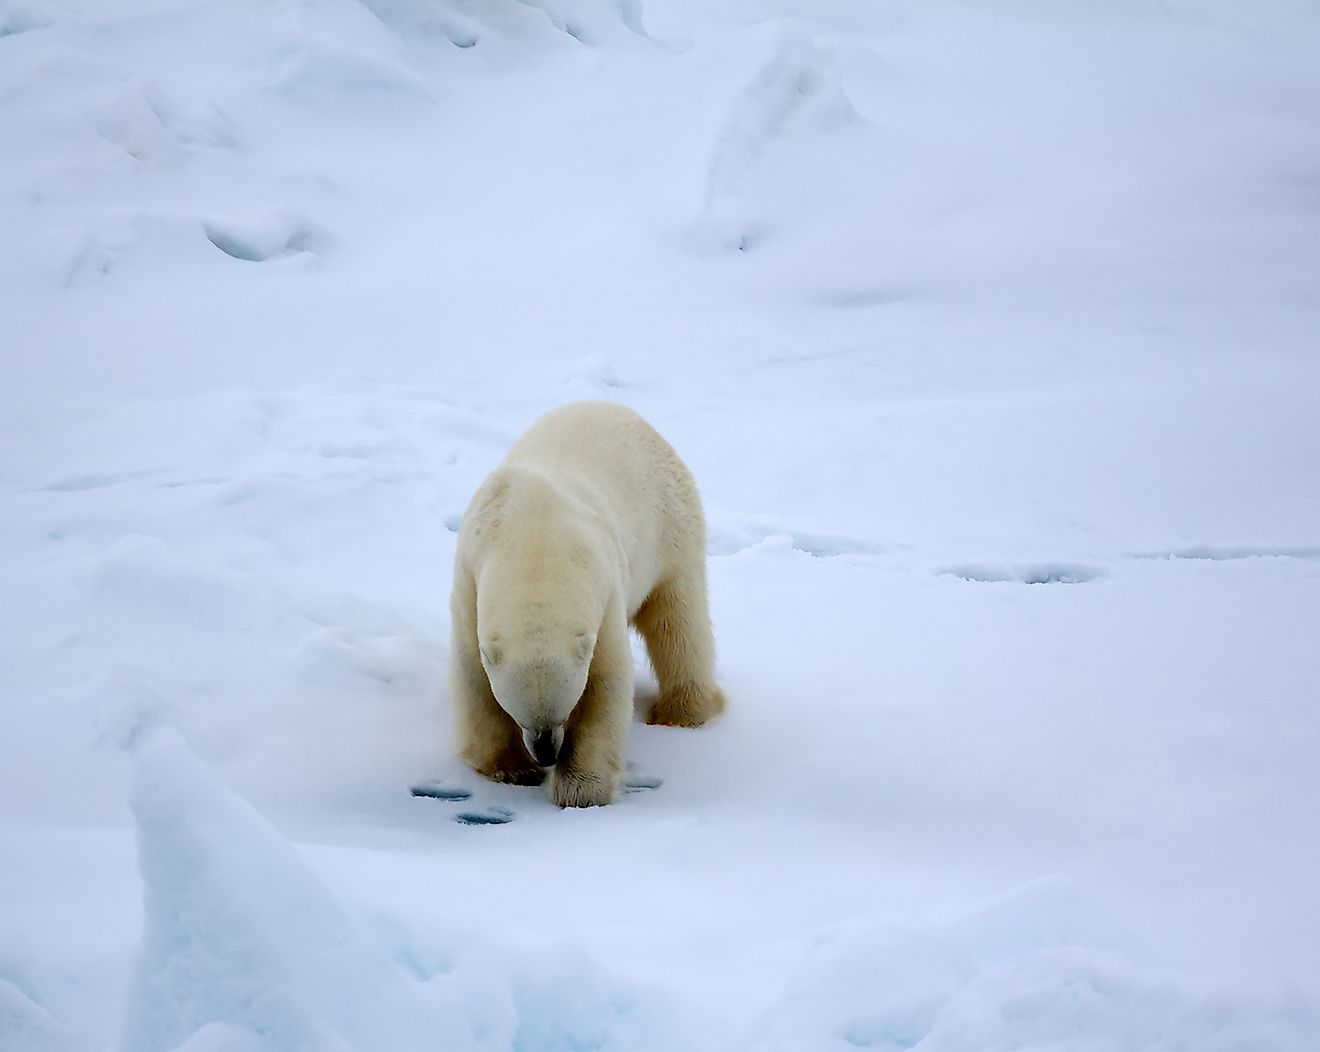 A polar bear male patiently waiting near the hole of a seal for it to come out so that he can hunt the same. Image credit:  Maksimilian/Shutterstock.com